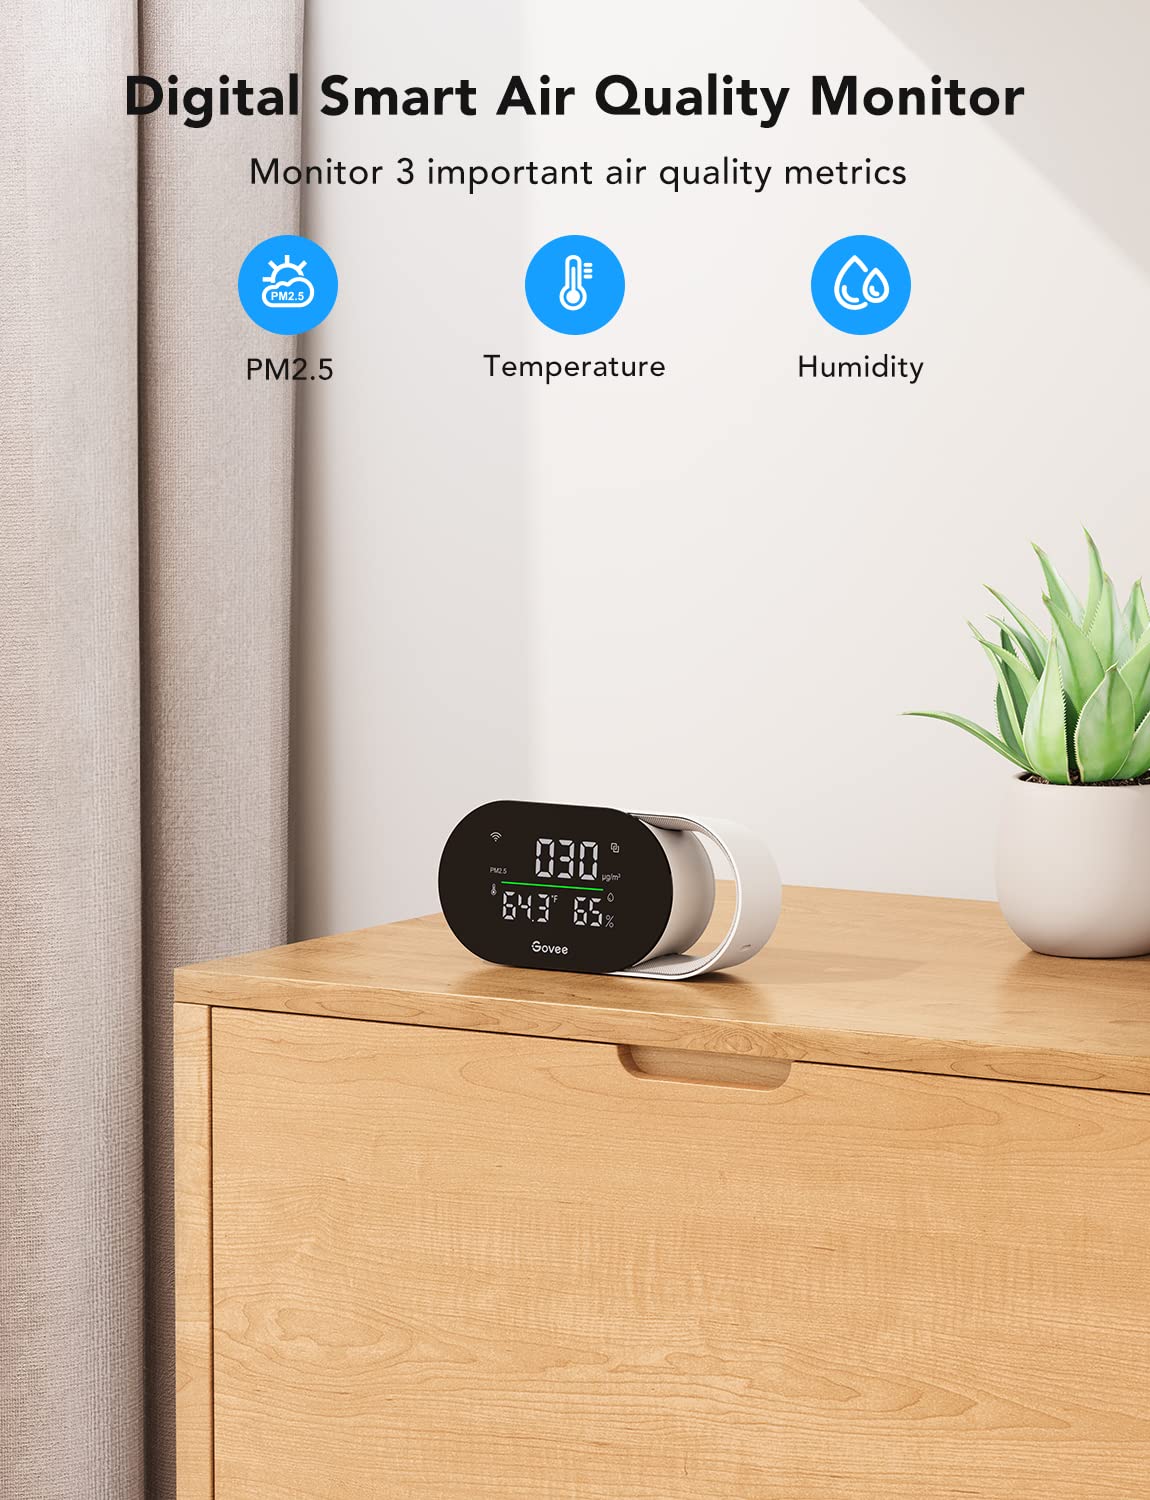 Govee Smart Air Quality Monitor, Indoor Air Quality Meter Detects PM2.5,  Temperature, and Humidity, H5106 with LED Air Quality Indicator&Clock, Work  with Govee Smart Appliances, Type-C Cable Required - OpenMQTTGateway  compatible